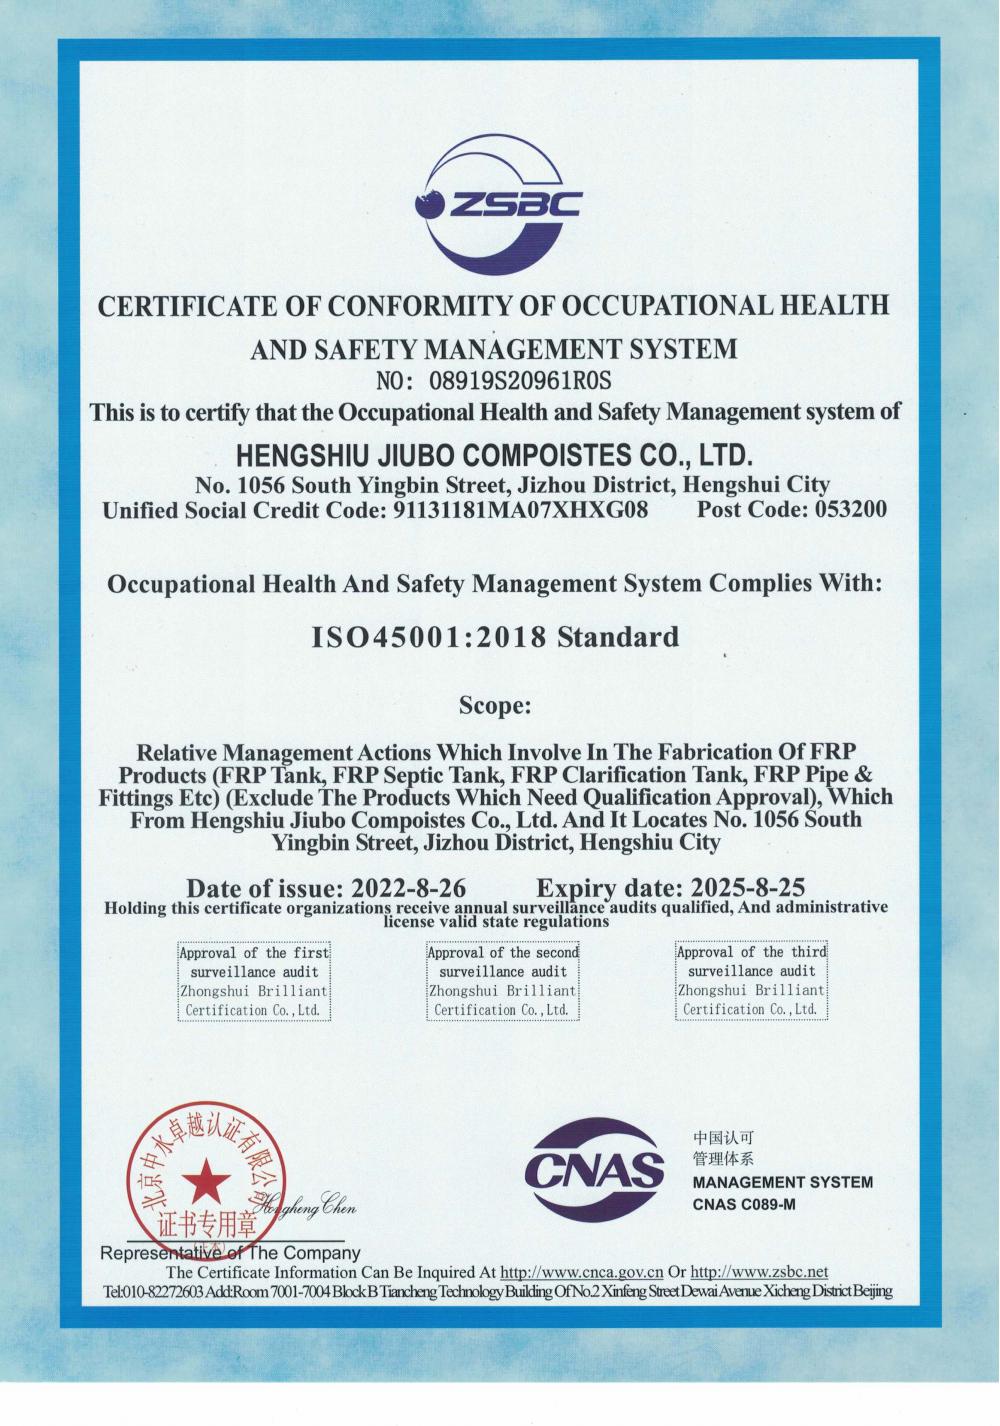 CERTIFICATE OF CONFORMITY OF OCCUPATIONAL HEALTHAND SAFETY MANAGEMENT SYSTEM